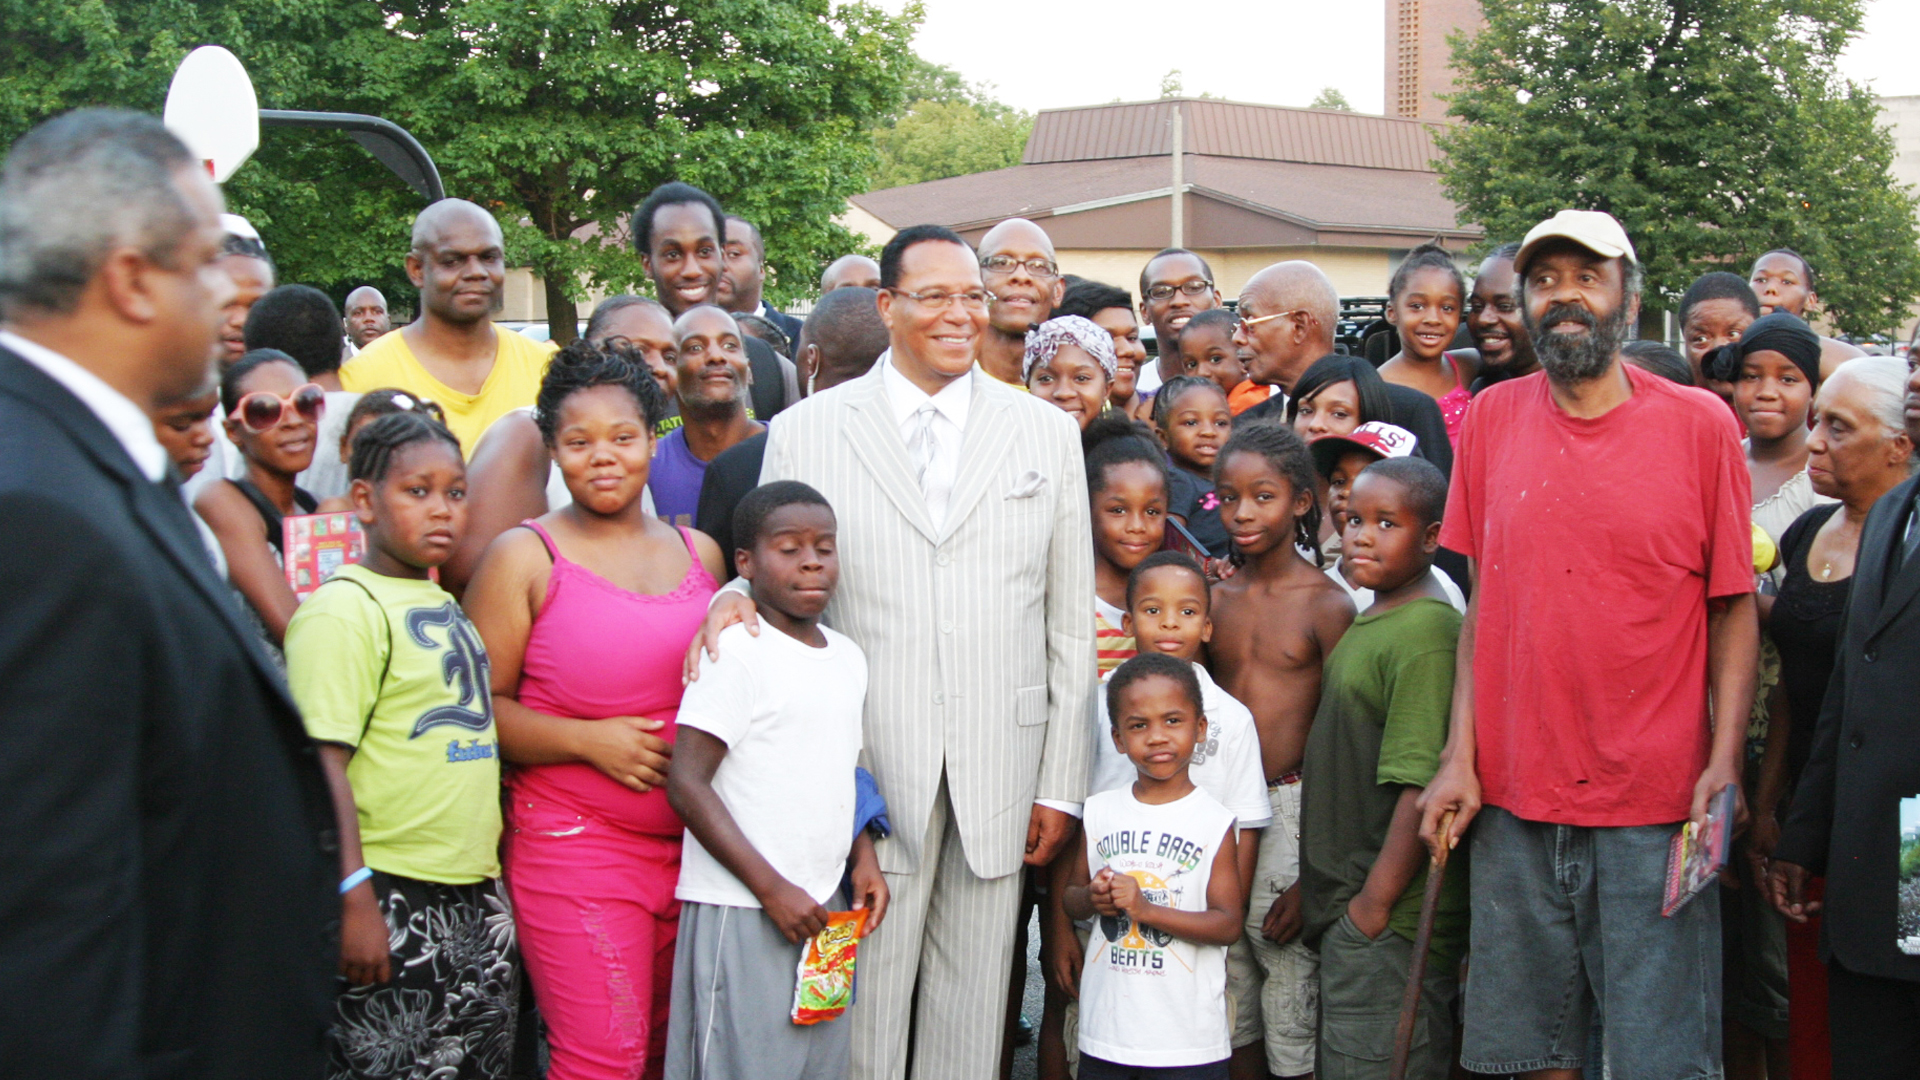 The Honorable Minister Louis Farrakhan showing love and support with community. Photo: FCN Archives